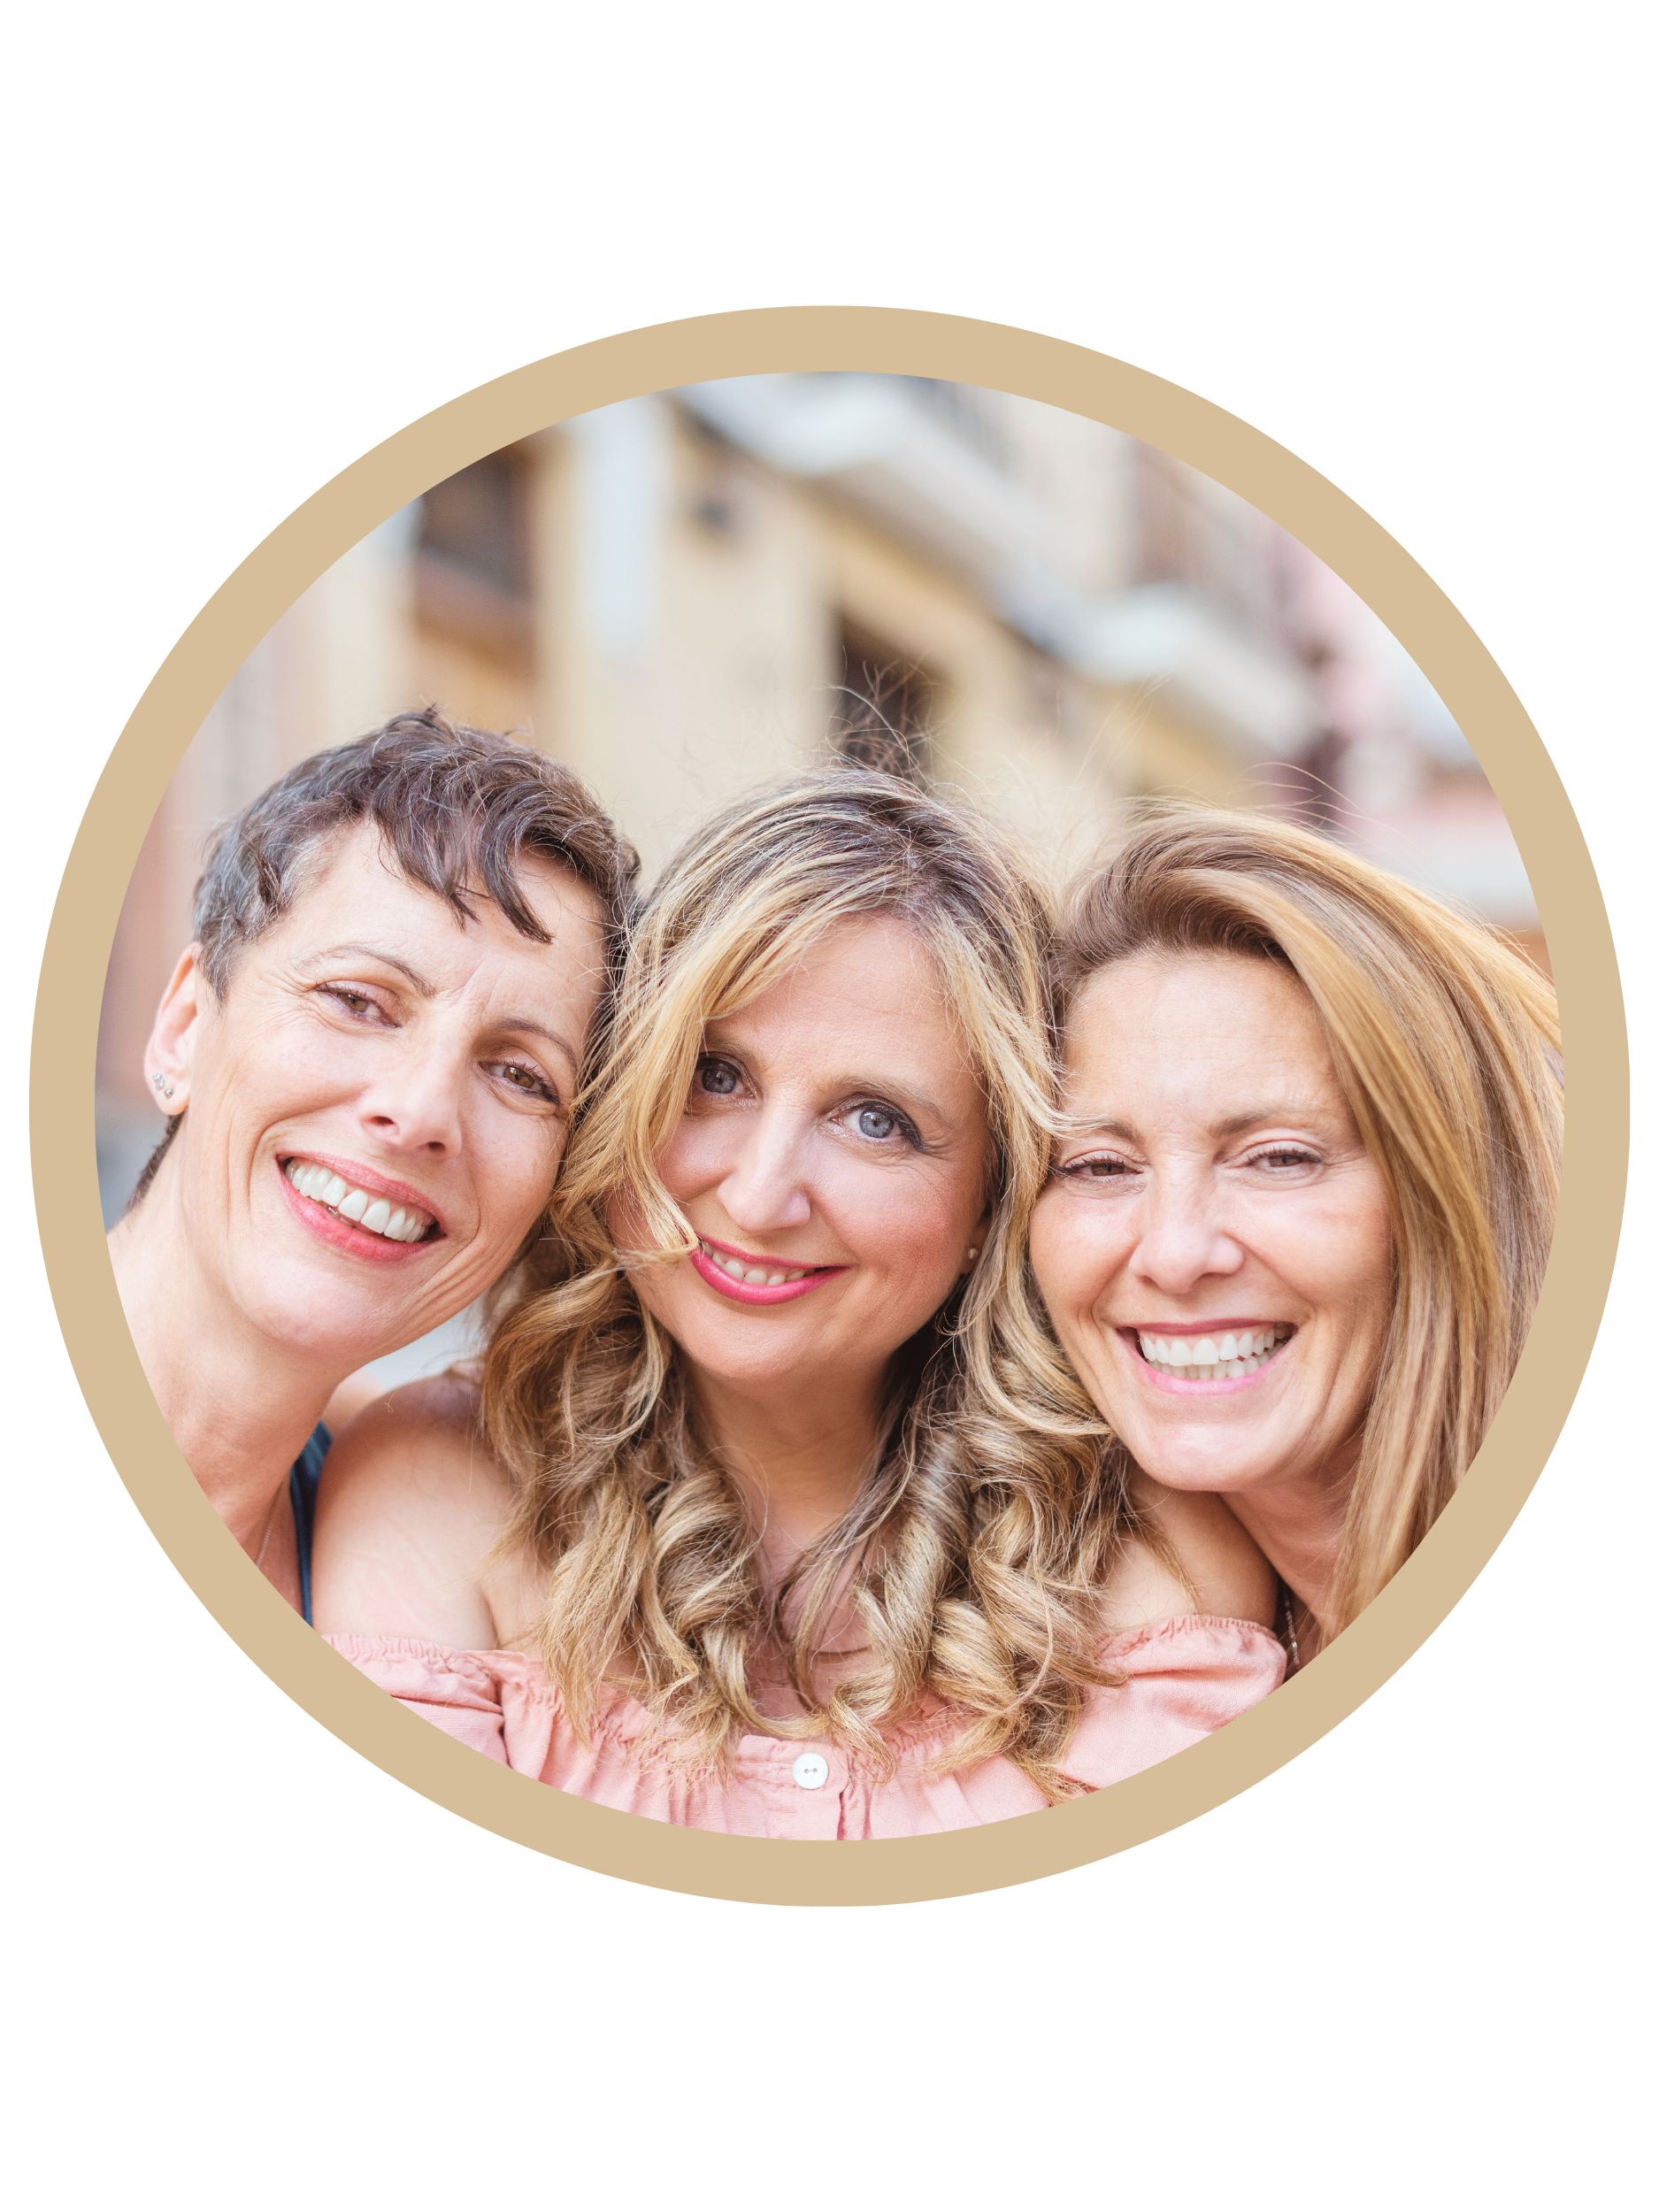 JOIN OUR “MYTHBUSTING MENOPAUSE” COMMUNITY ON FACEBOOK thumbnail